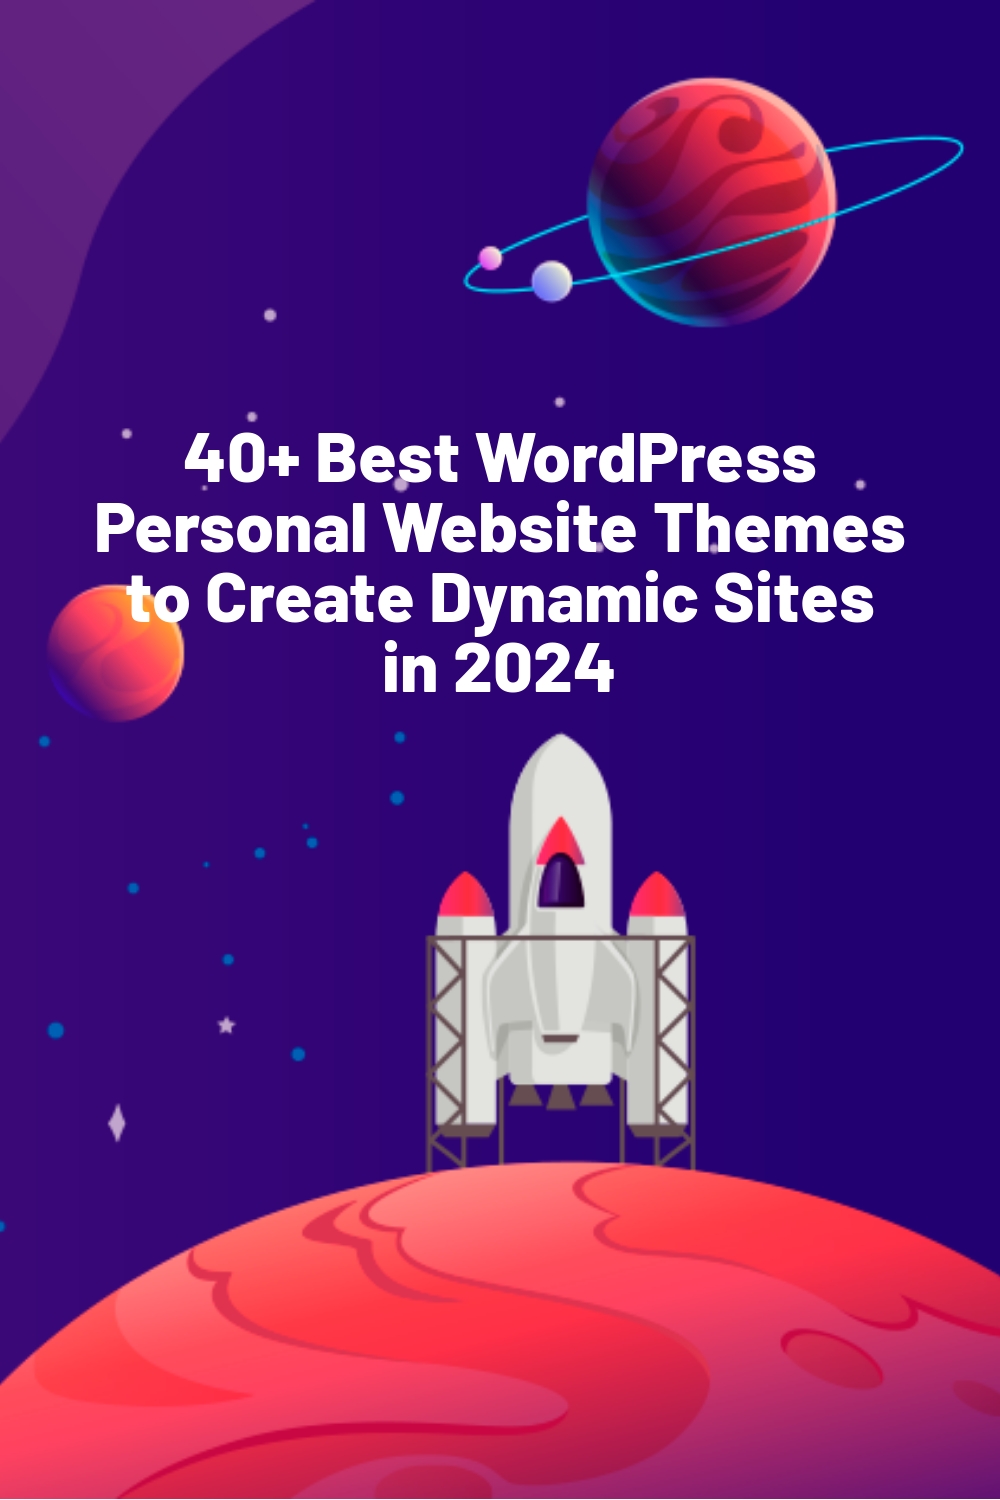 40+ Best WordPress Personal Website Themes to Create Dynamic Sites in 2024